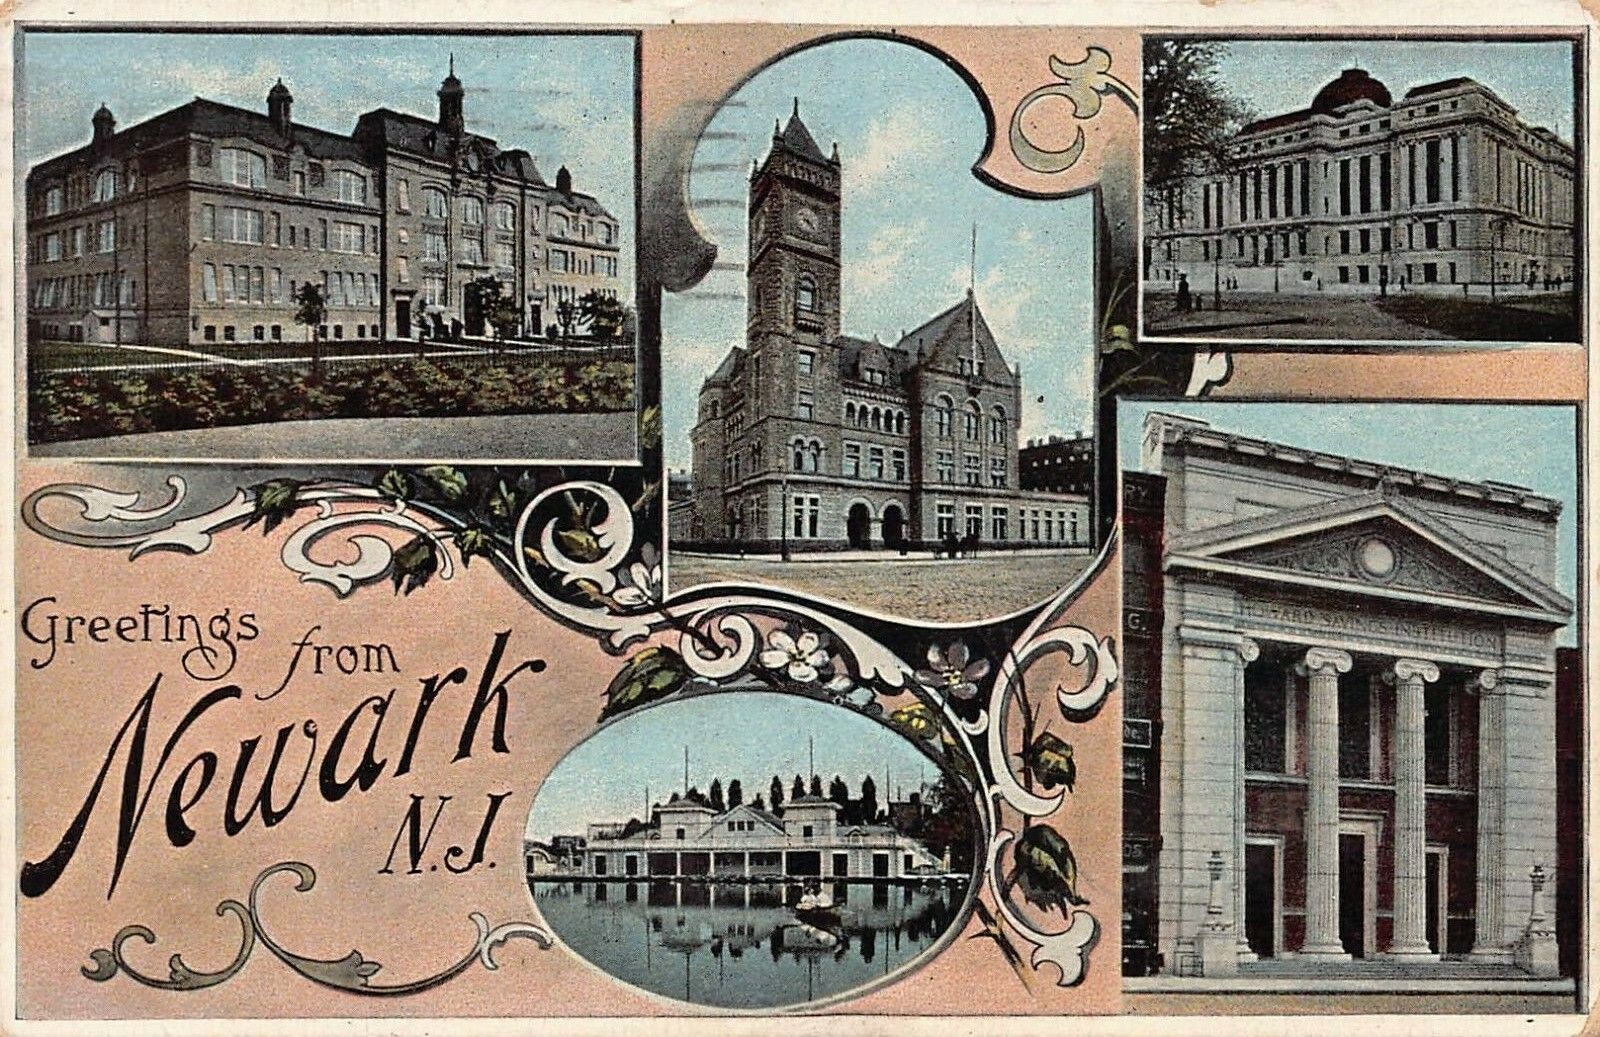 Five Views and Greetings from Newark, New Jersey, early postcard, used in 1909